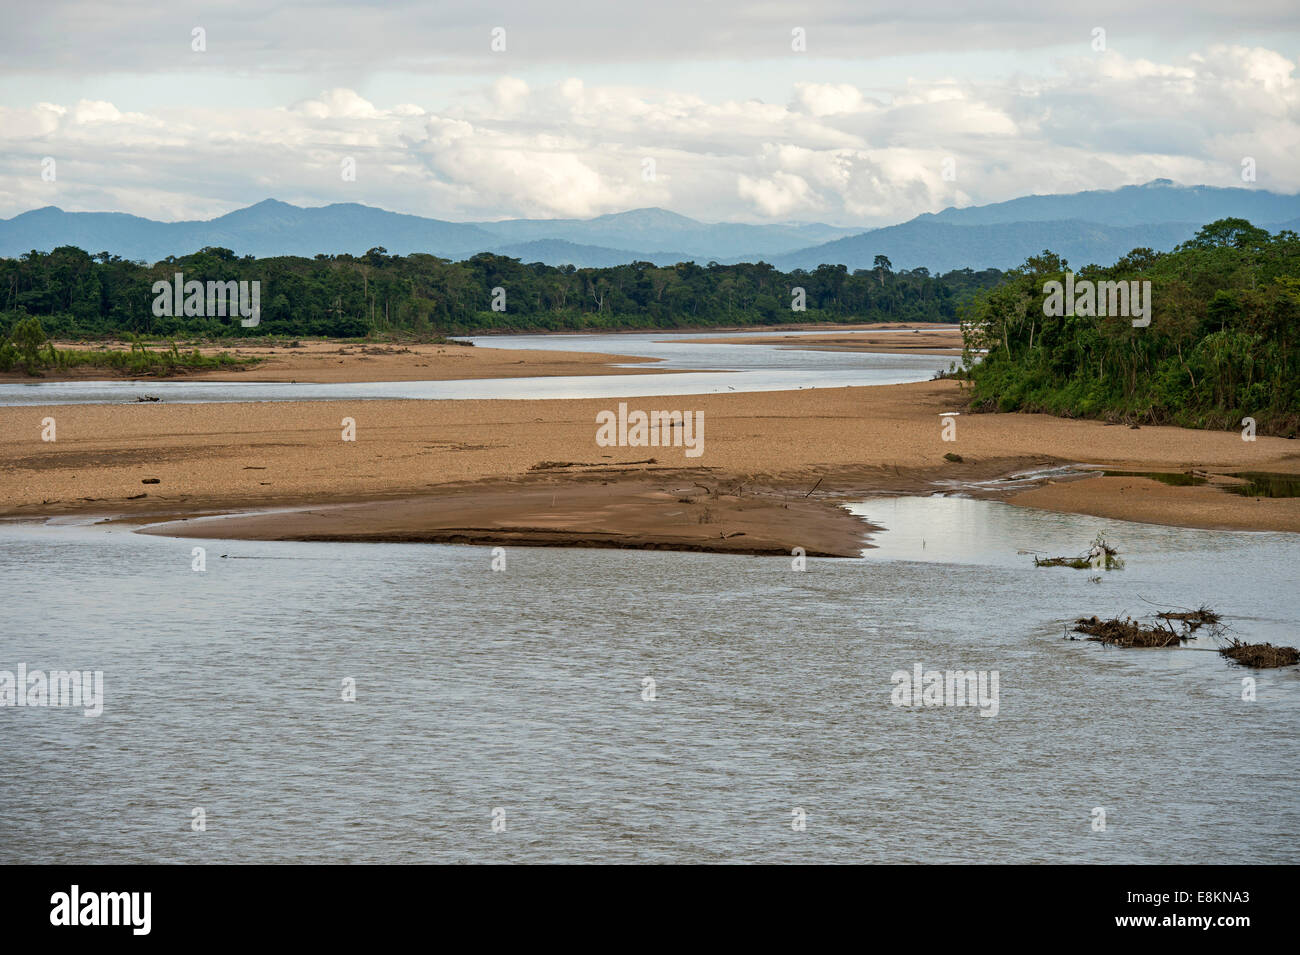 Flooded areas on the banks of the Tambopata River, Tambopata Nature Reserve, Madre de Dios region, Peru Stock Photo